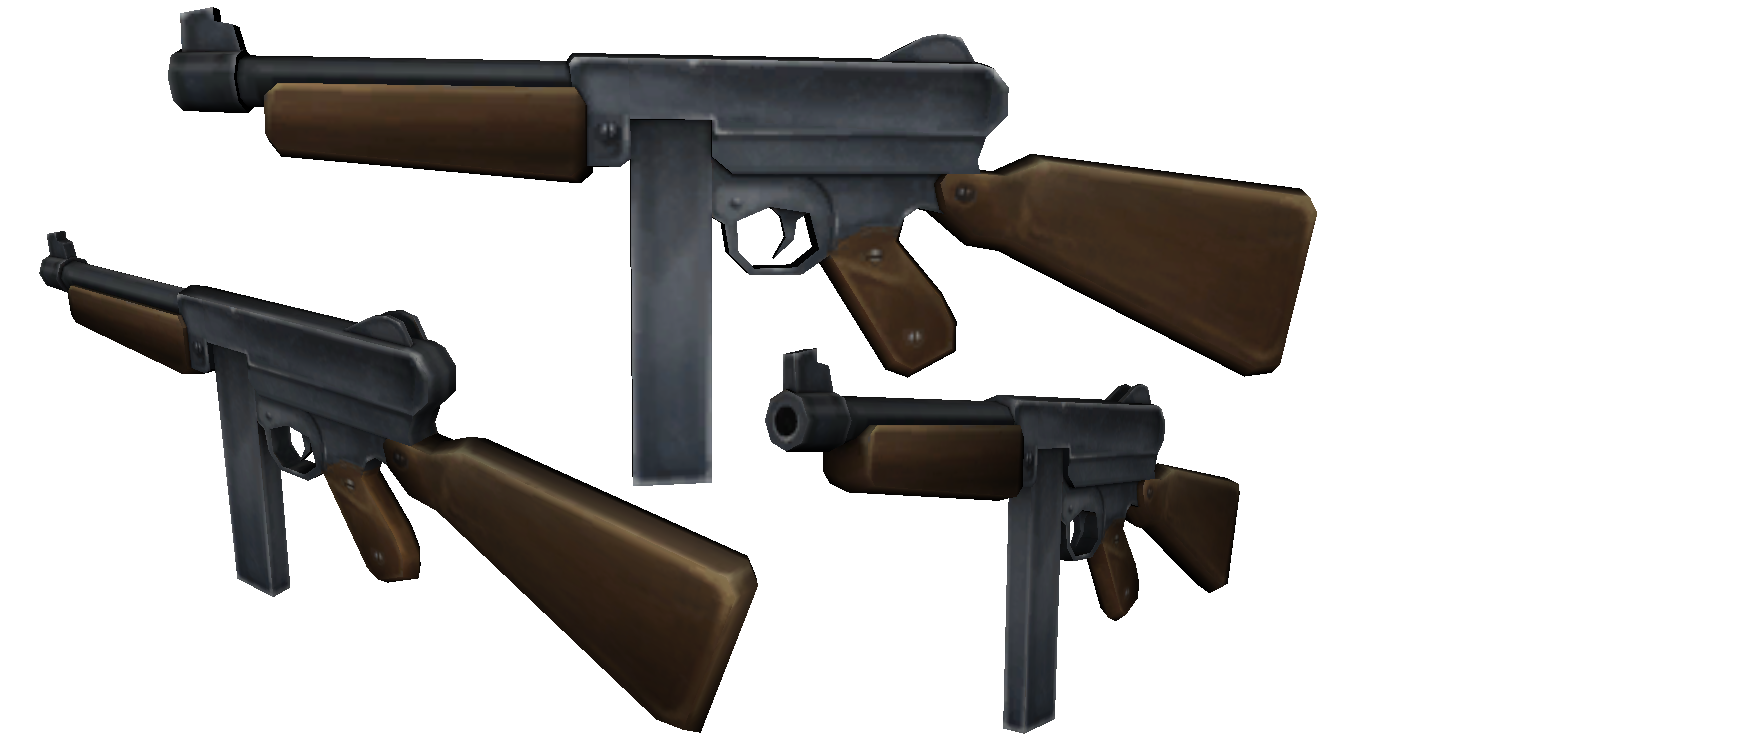 Download For Free Gun Png In High Resolution